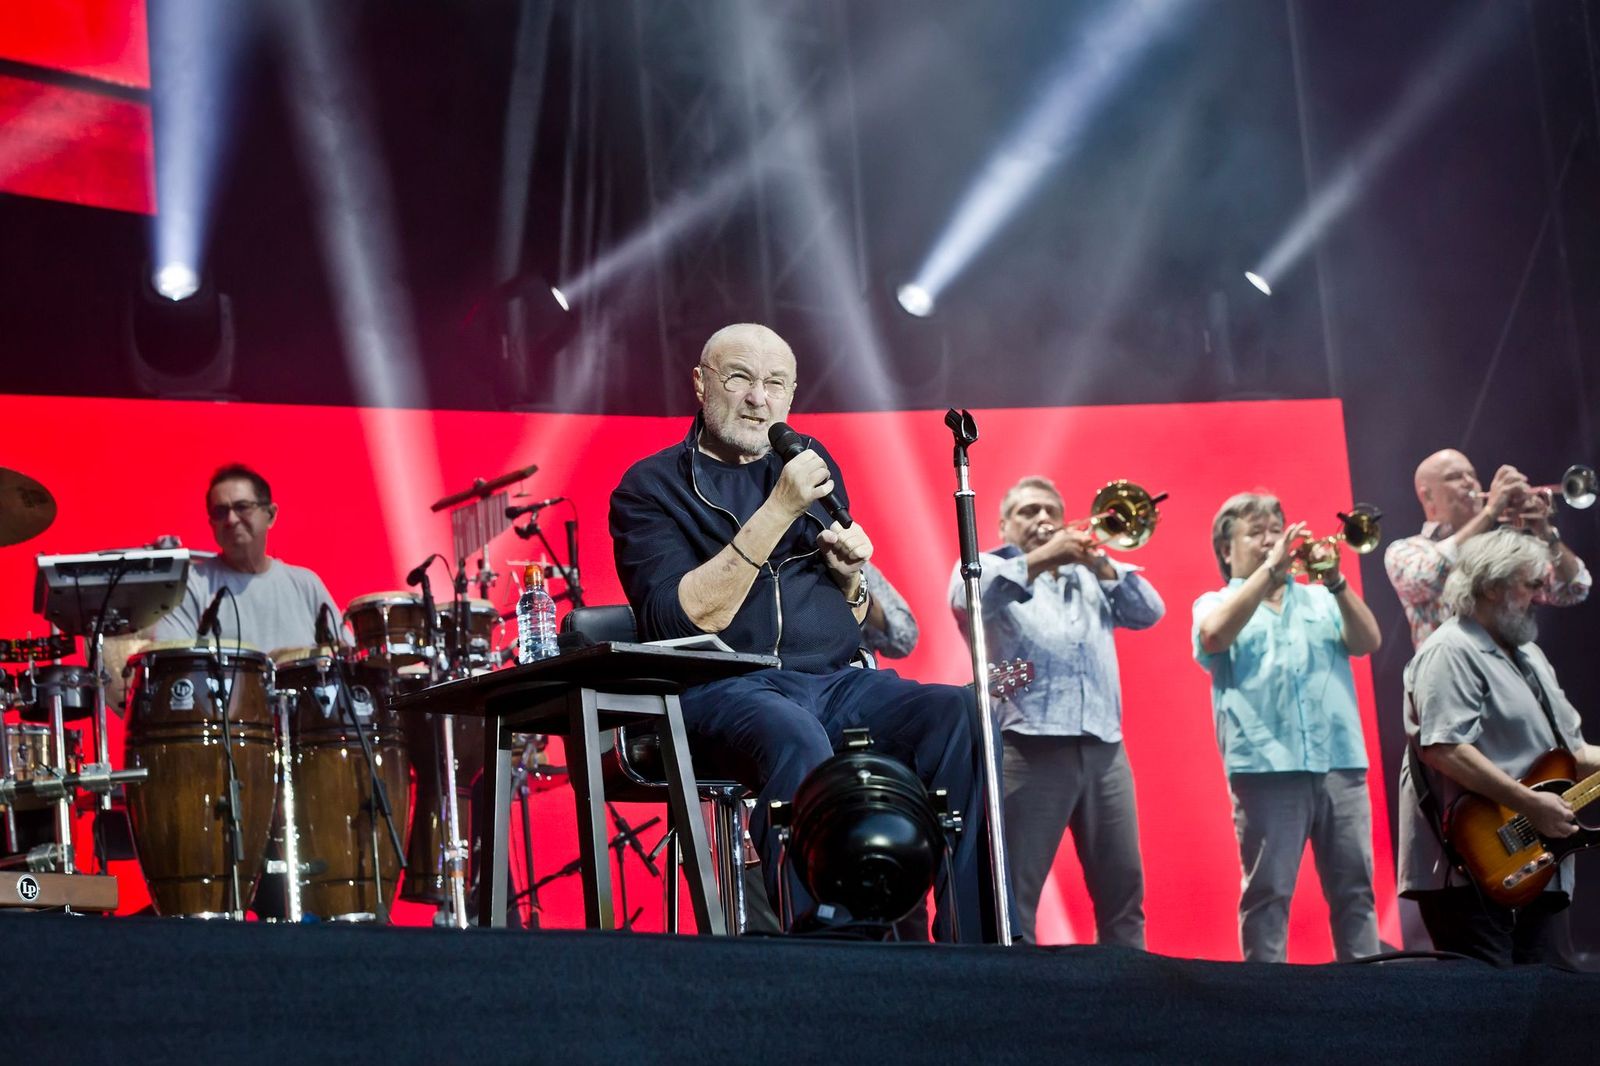 Phil Collins performs live on stage during a concert at the Olympiastation on June 7, 2019, in Berlin, Germany | Photo: Frank Hoensch/Getty Images